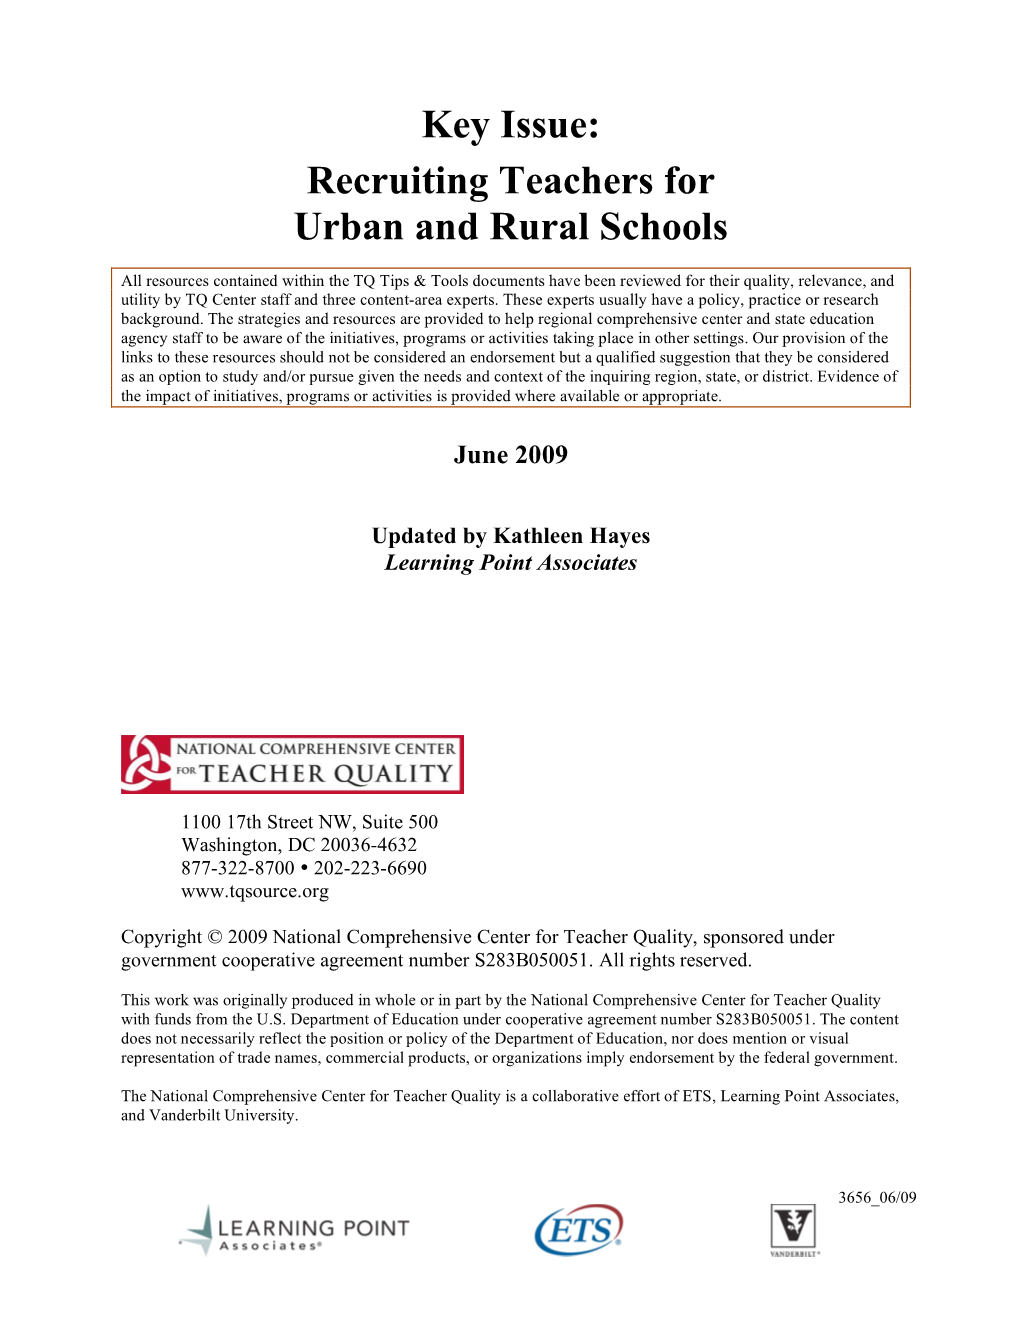 Key Issue on Recruiting Urban and Rural Teachers-Ed2